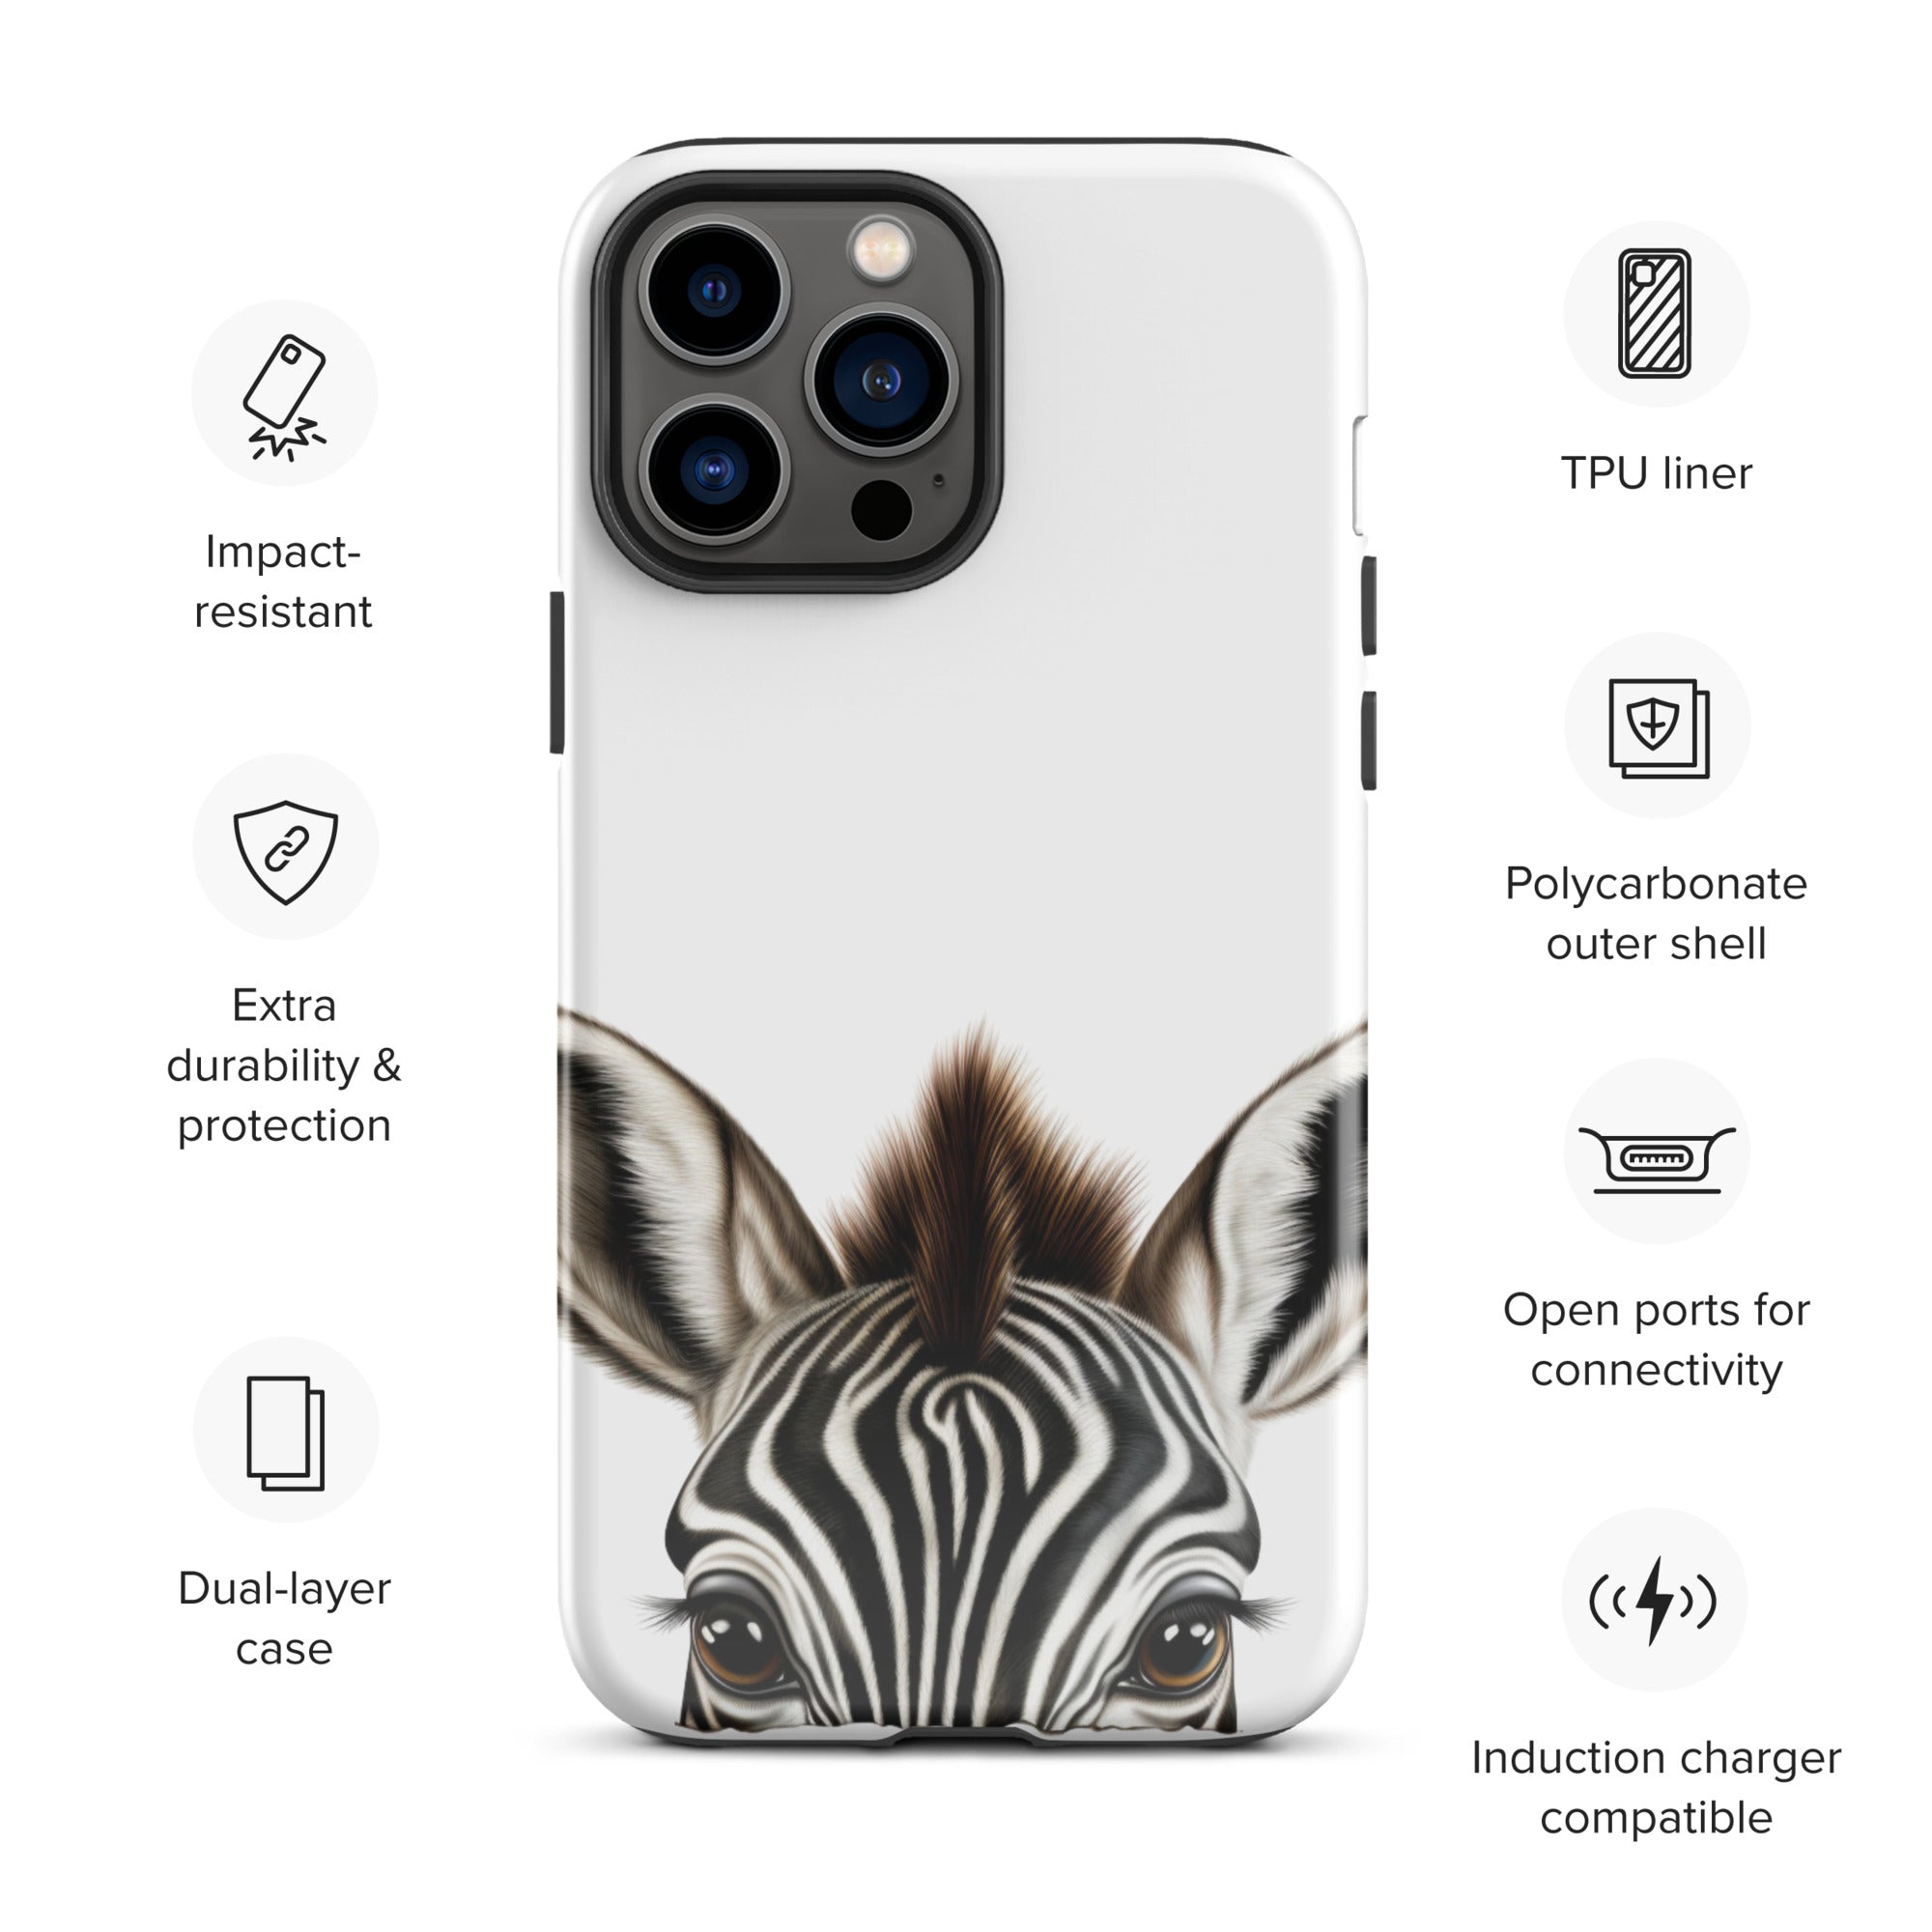 tough-case-for-iphone-glossy-iphone-13-pro-max-front-656e073e98b1c.jpg